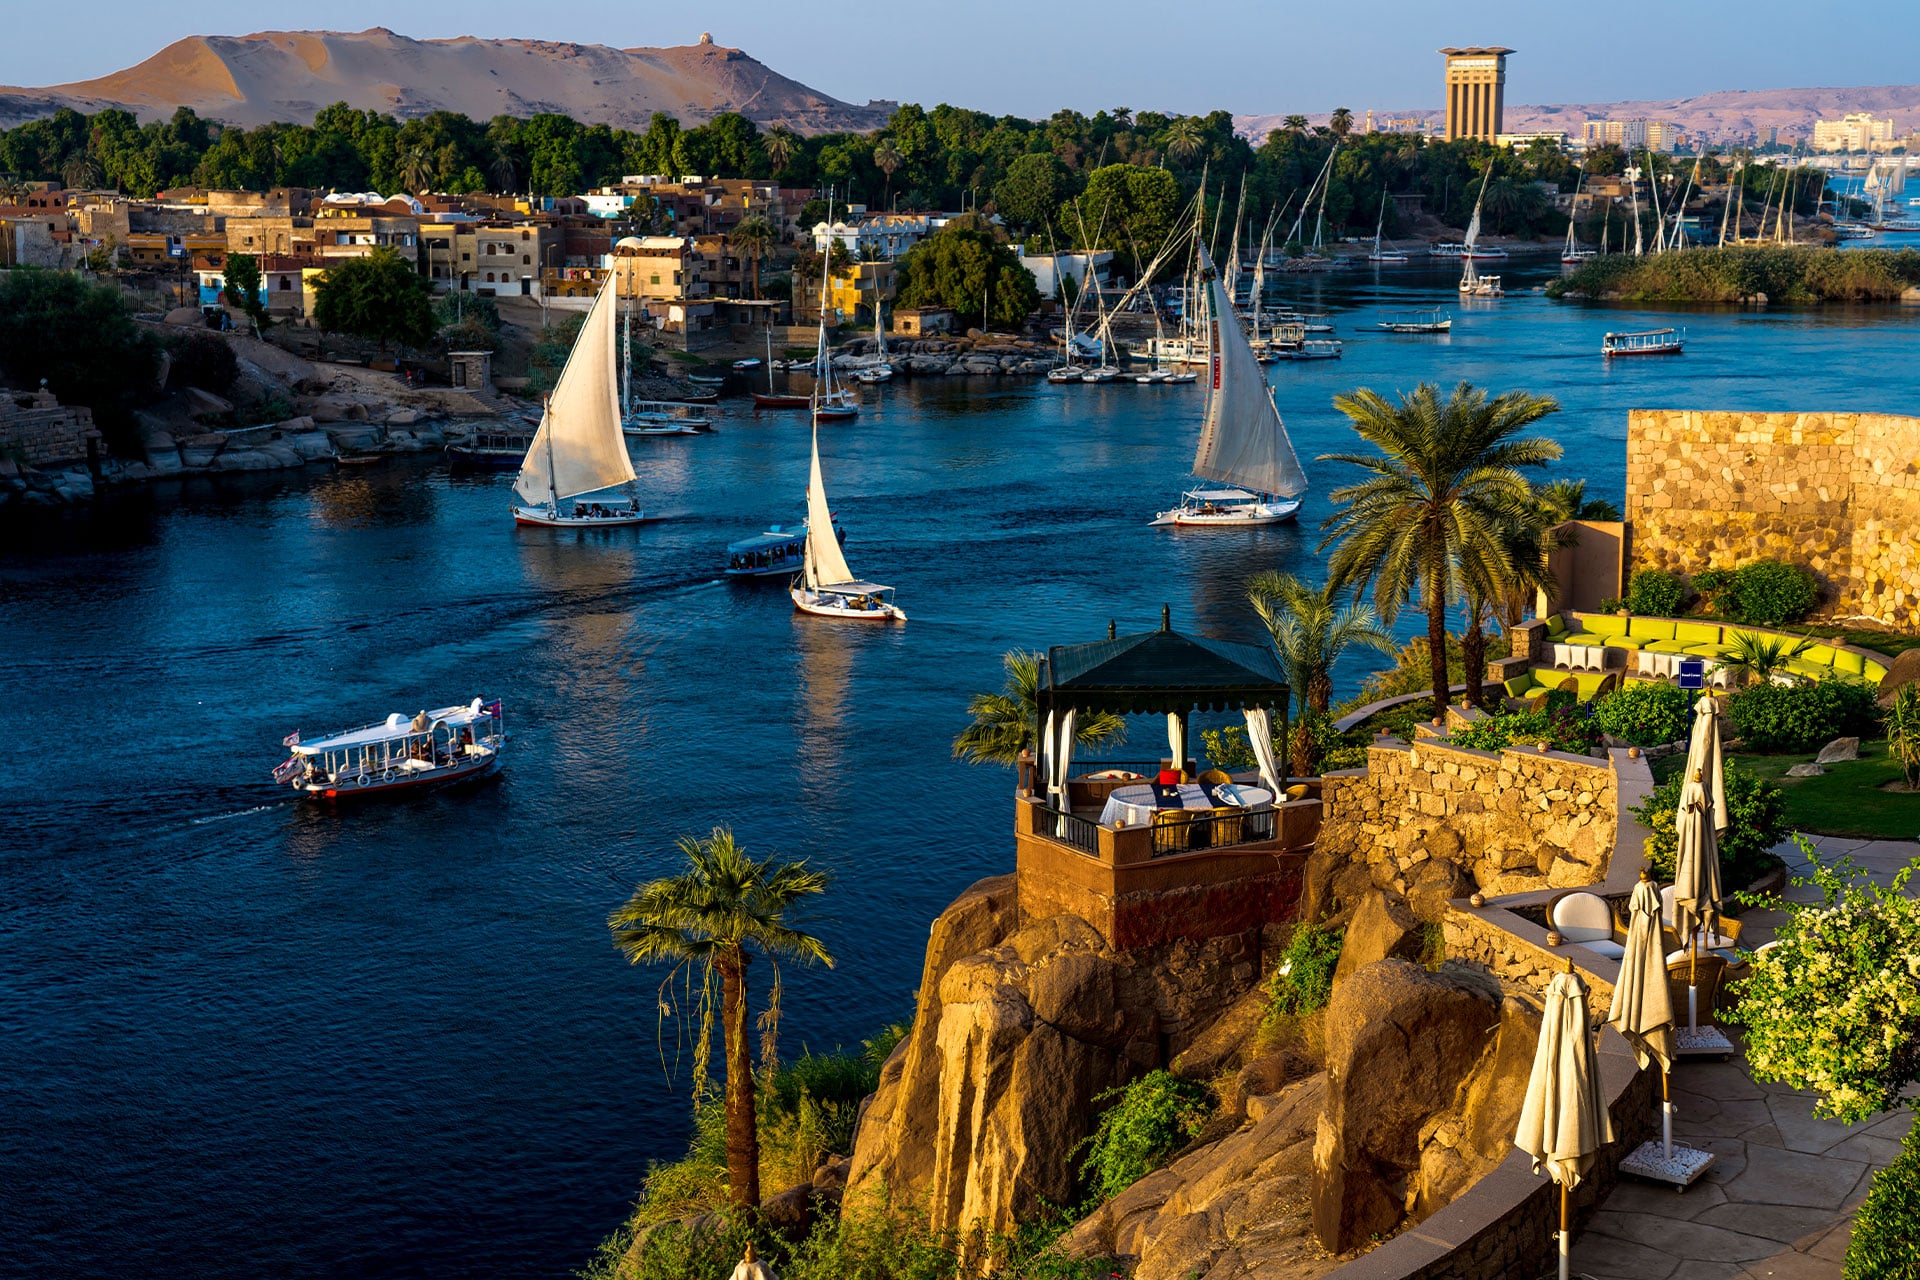 The Nile River flowing through Aswan dotted with cruise boats and feluccas.